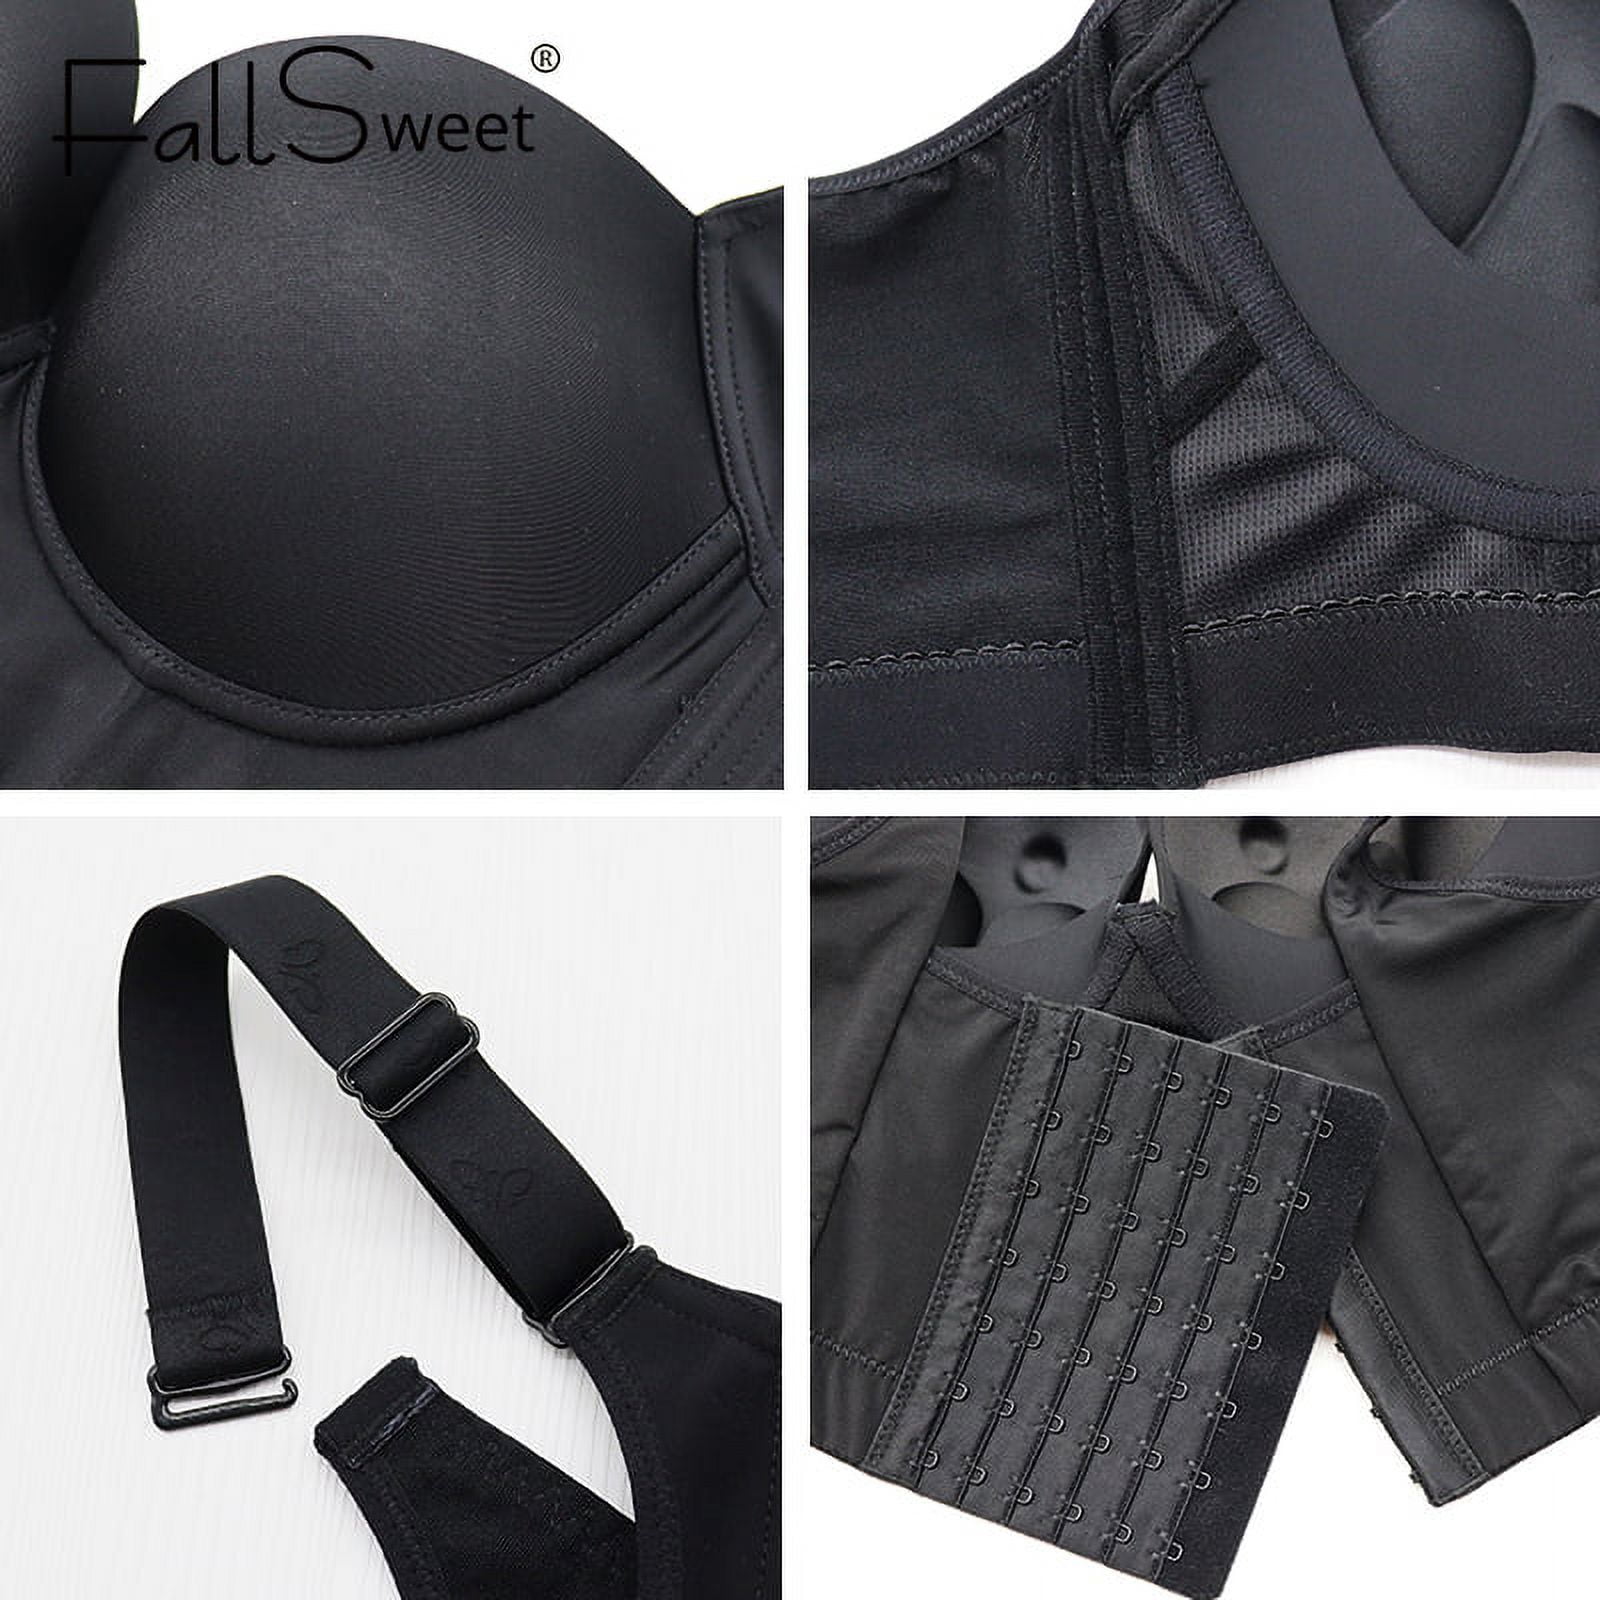 FallSweet Plus Size Bras Women Hide Back Fat Underwear Shpaer Incorporated Full  Back Coverage Deep Cup Sexy Push Up Bra Lingrie 22308r From 26,9 €